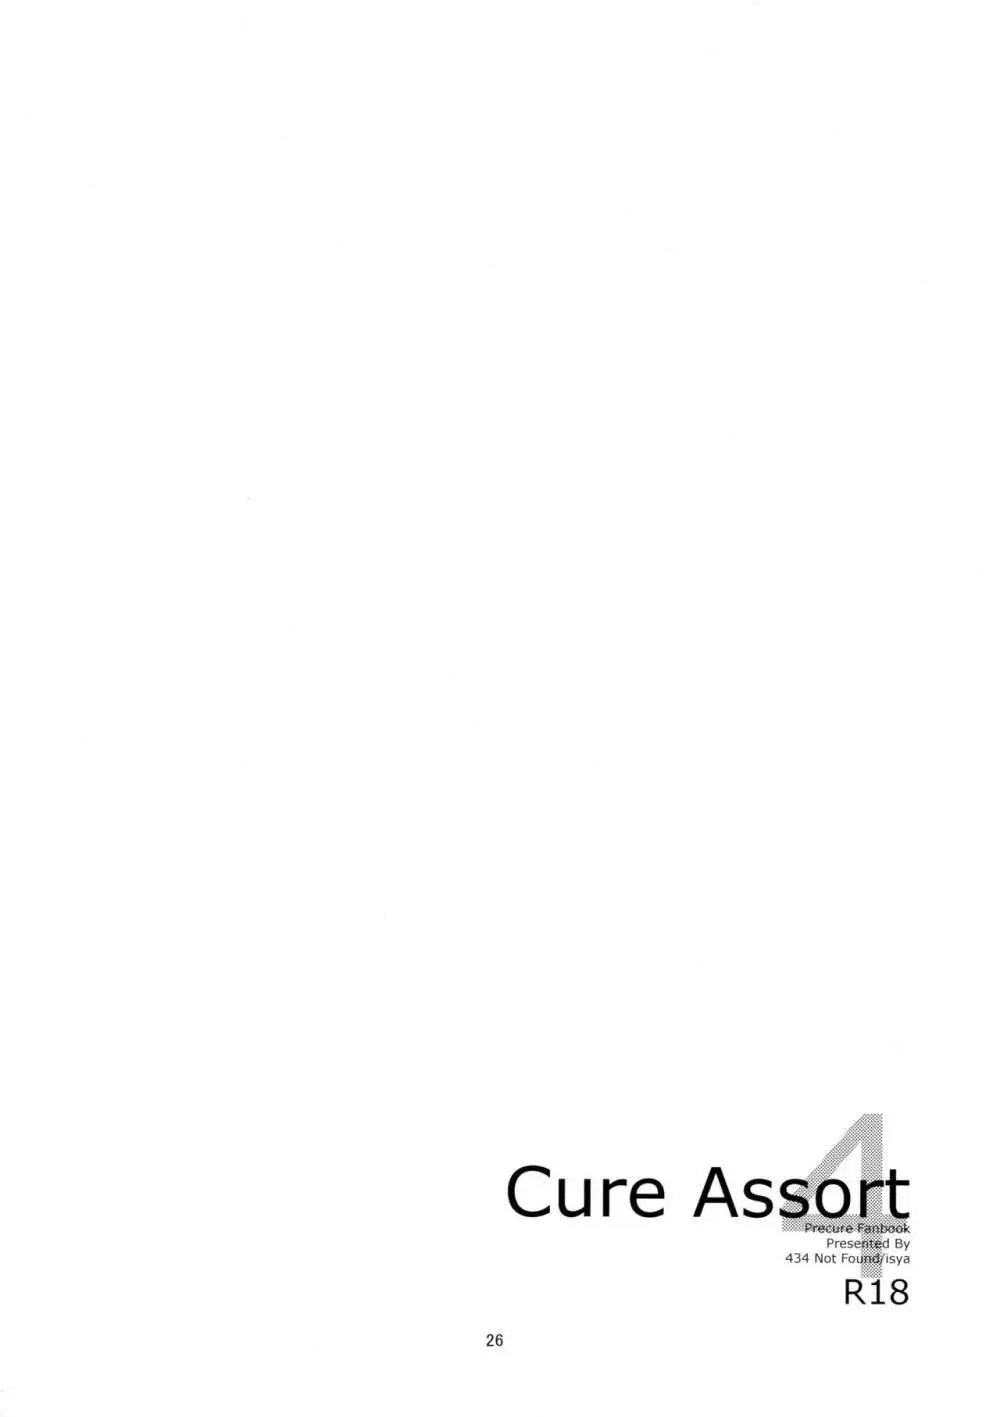 Cure Assort 4 Page.32